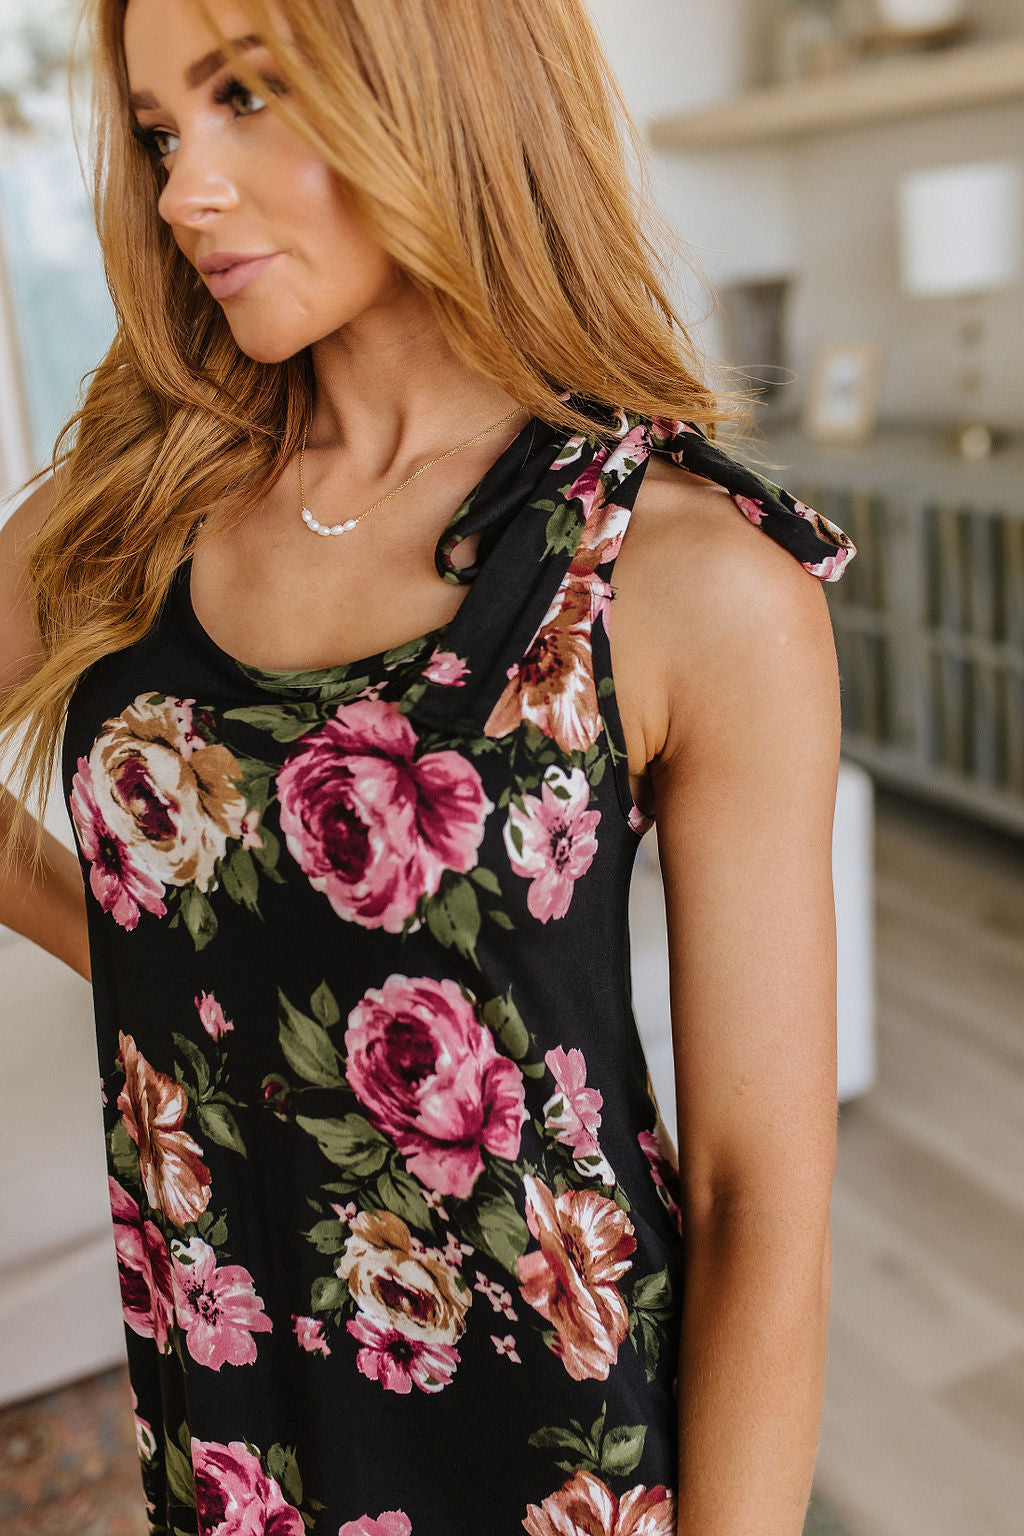 Fortuitous in Floral Maxi Dress - Atomic Wildflower